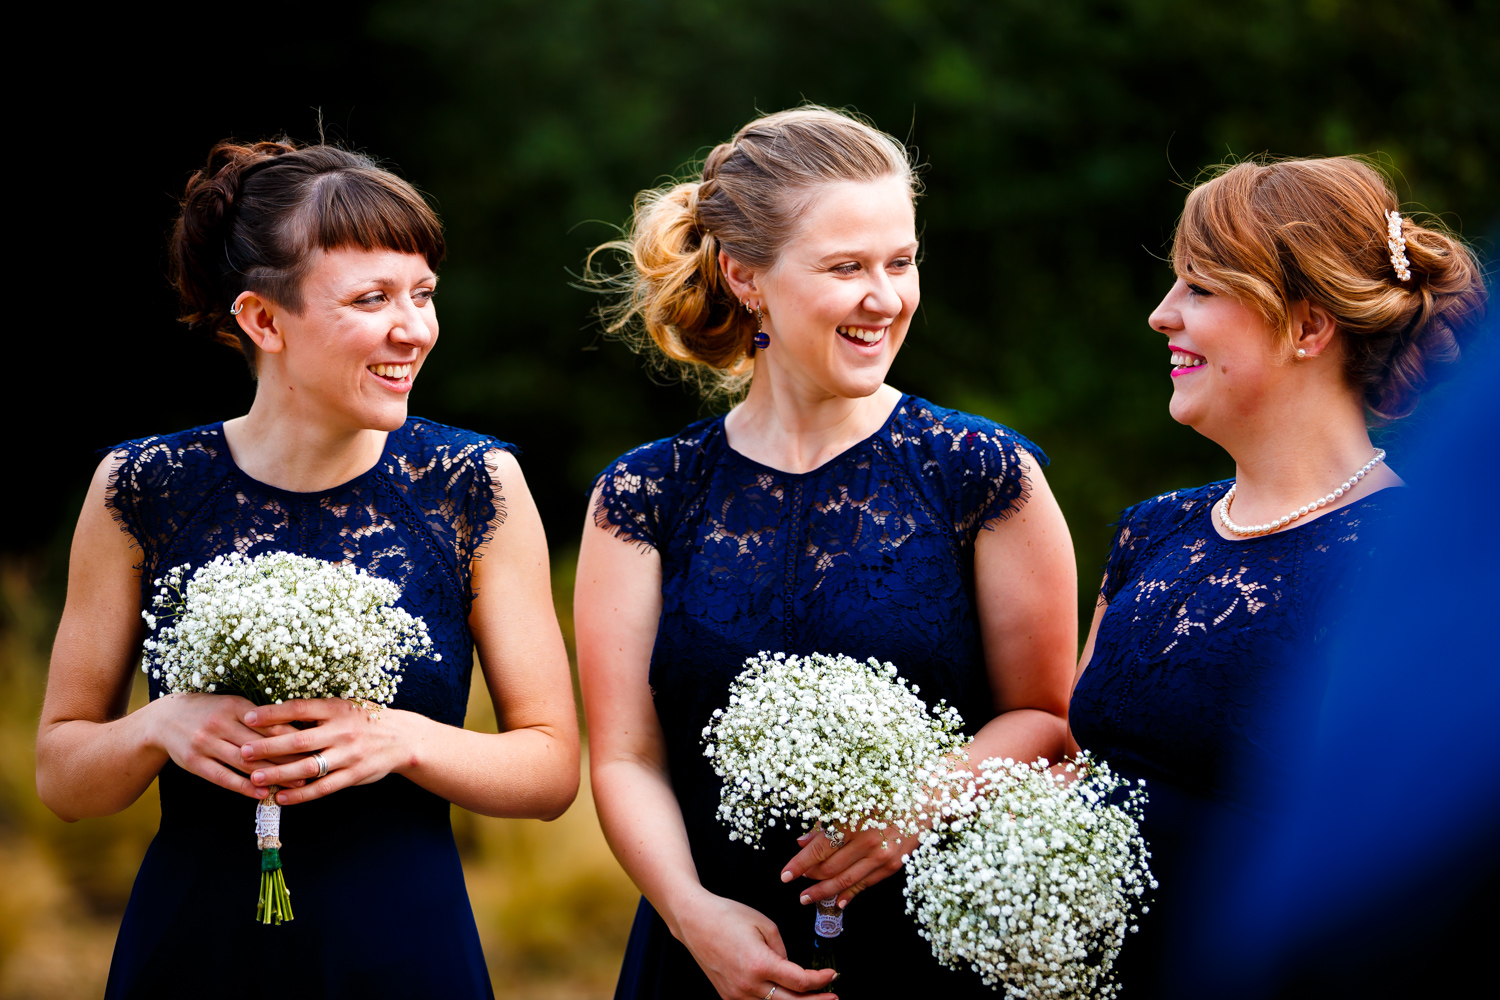 The bridesmaids laughing and joking